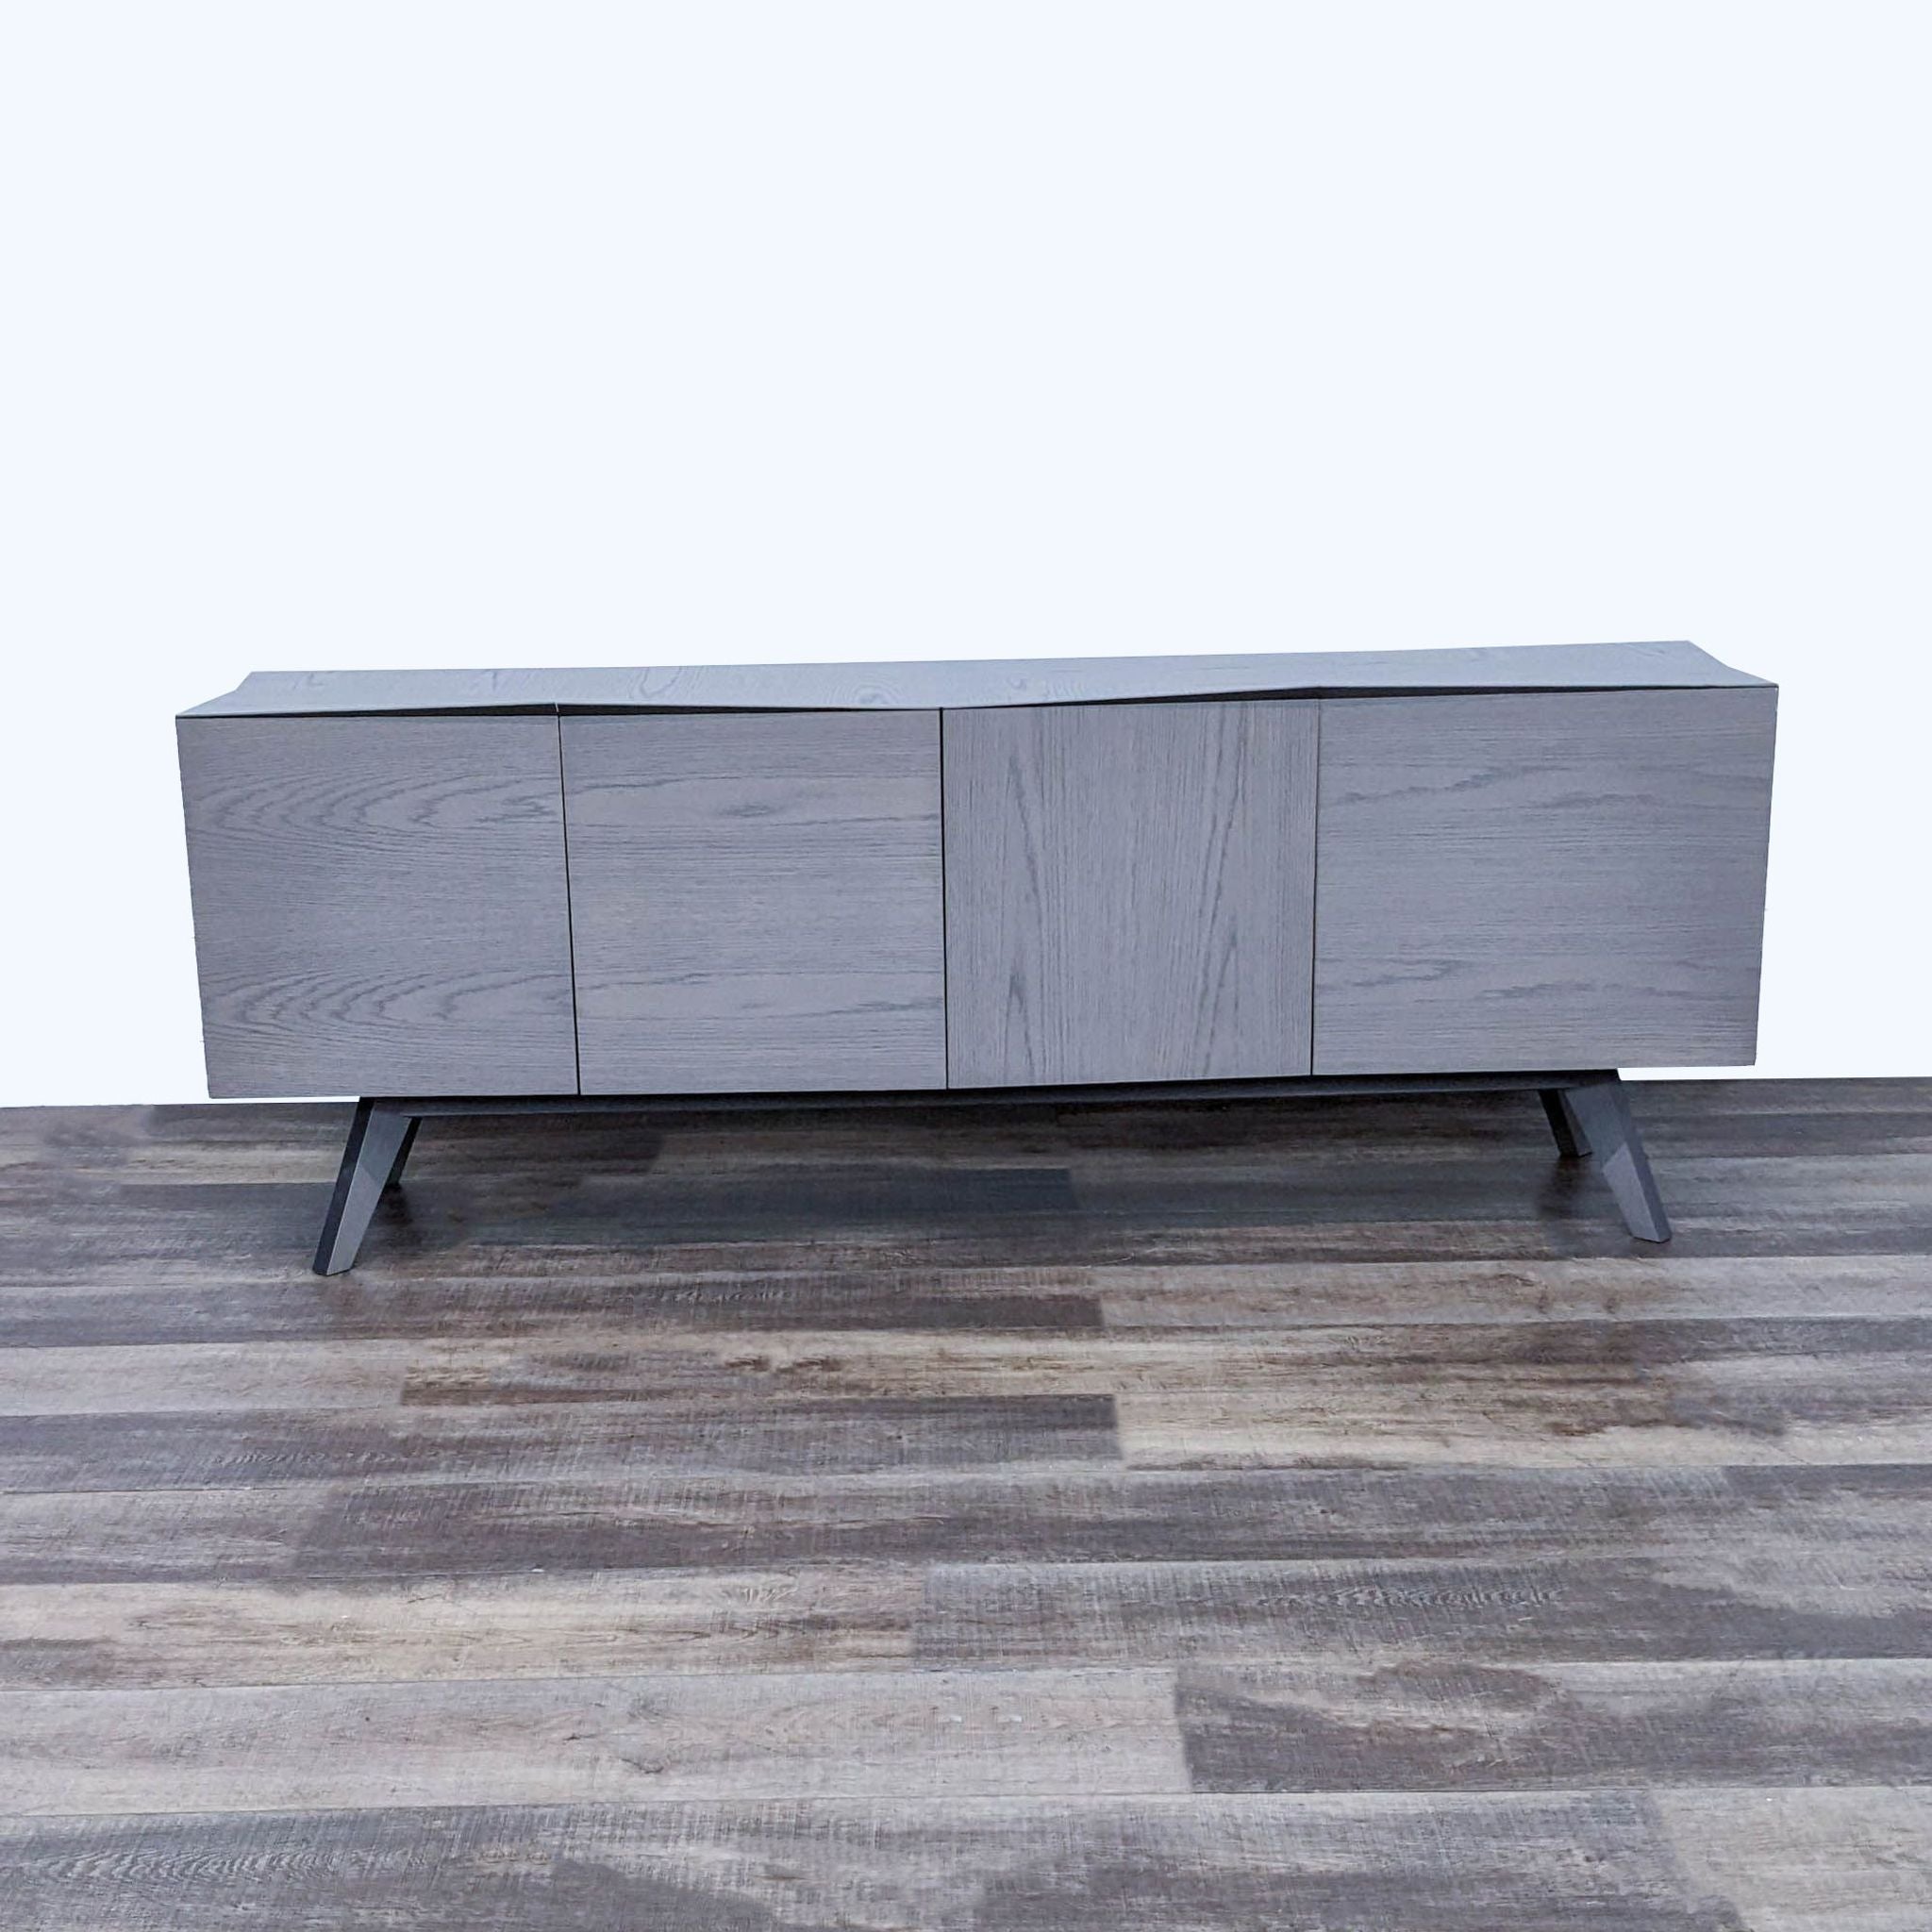 Alt text 1: Modern Roche Bobois oak veneer sideboard with offset lines and silver patina handles, designed by Christophe Delcourt.